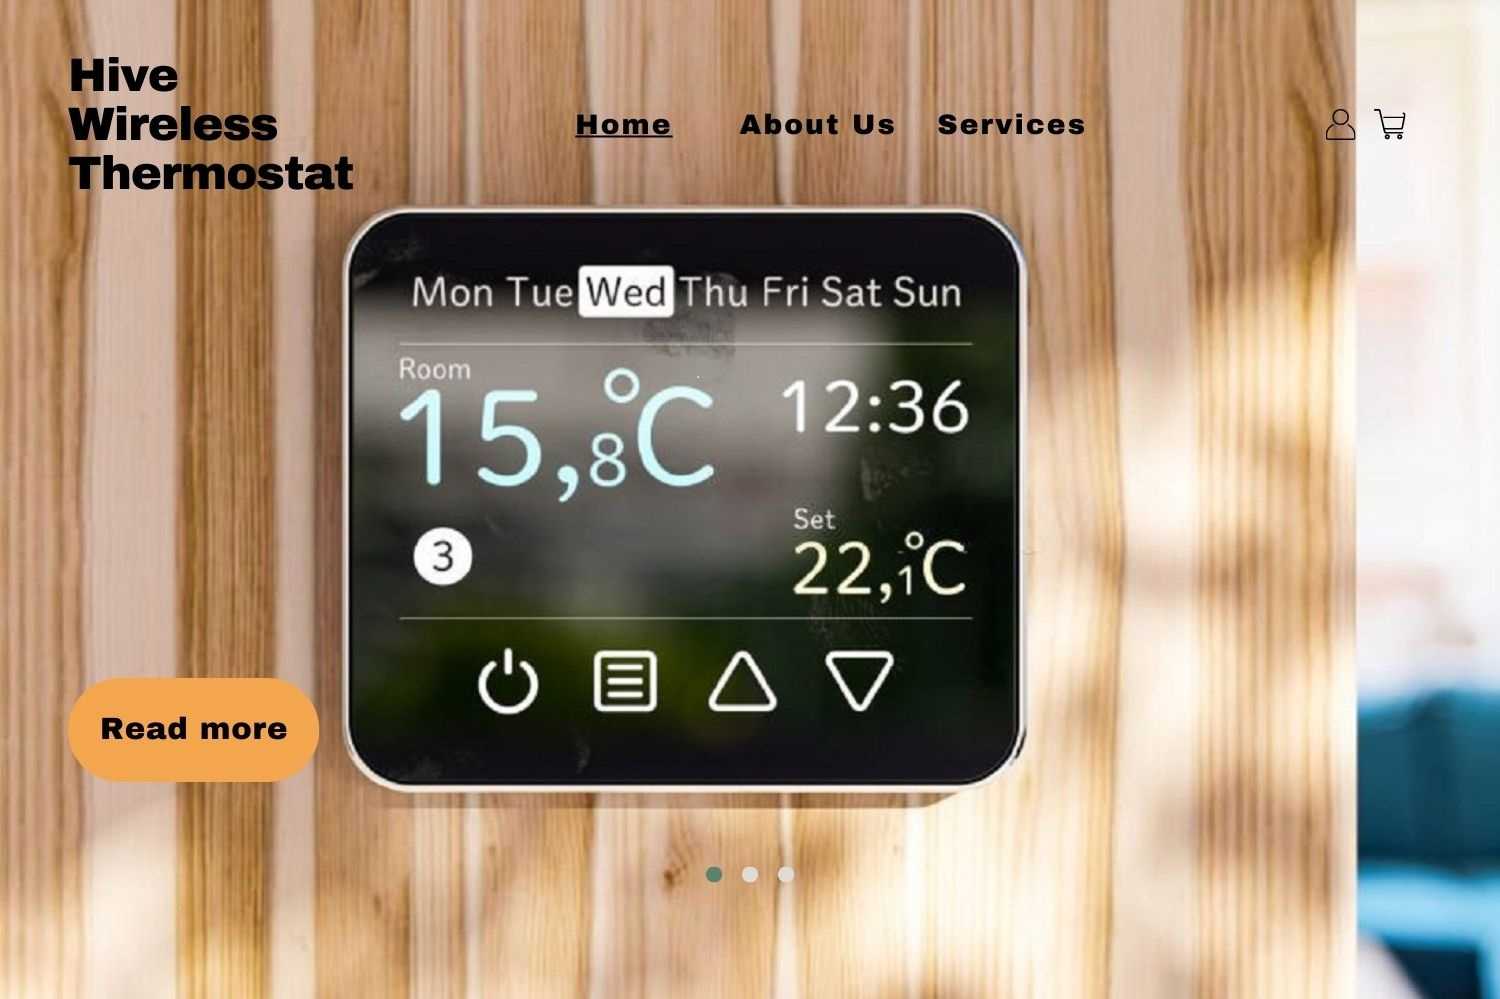 Heating Smart Thermostat